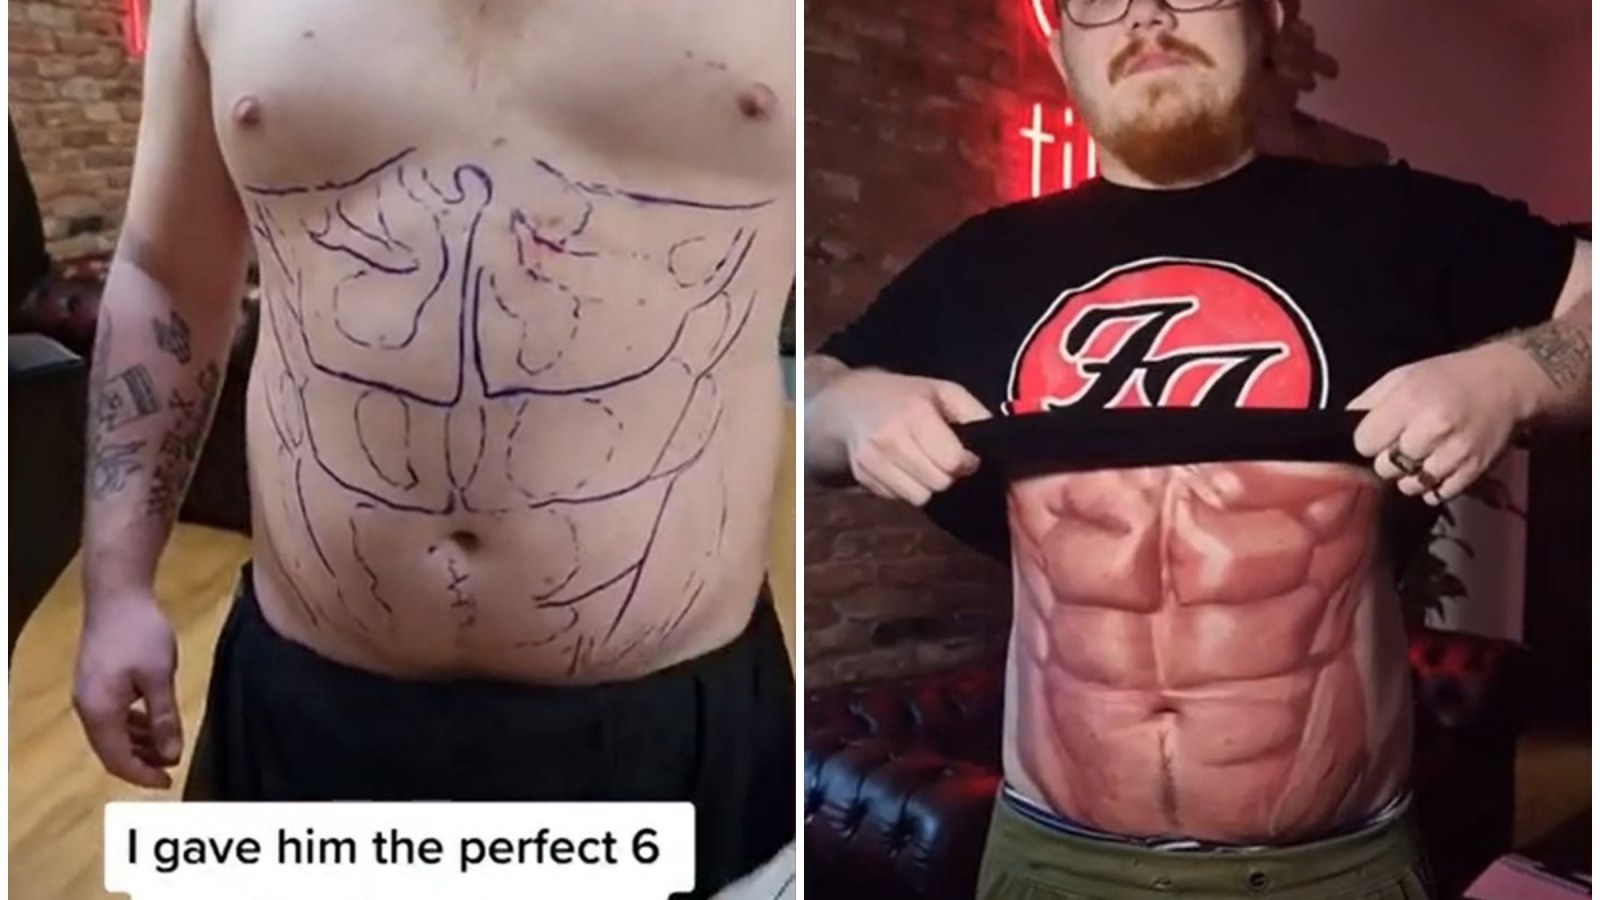 Man's Tattooed Six-Pack Sparks Fierce Debate Online Amid Claims It's 'Fake